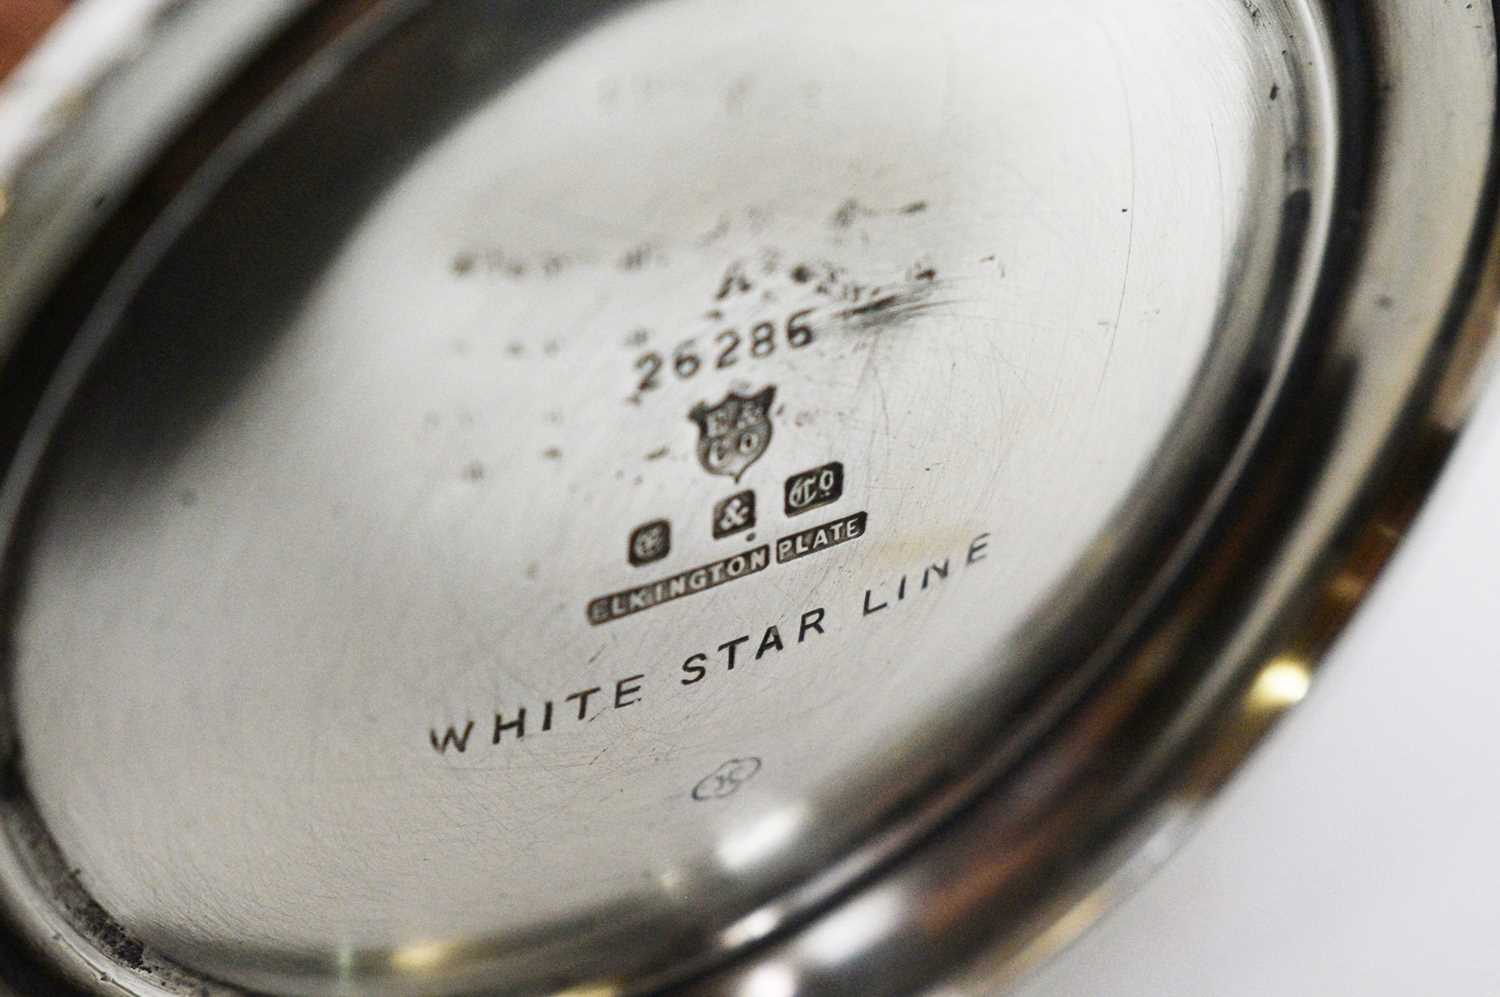 Elkington & Co for White Star Line: a plated hot milk jug, - Image 3 of 3